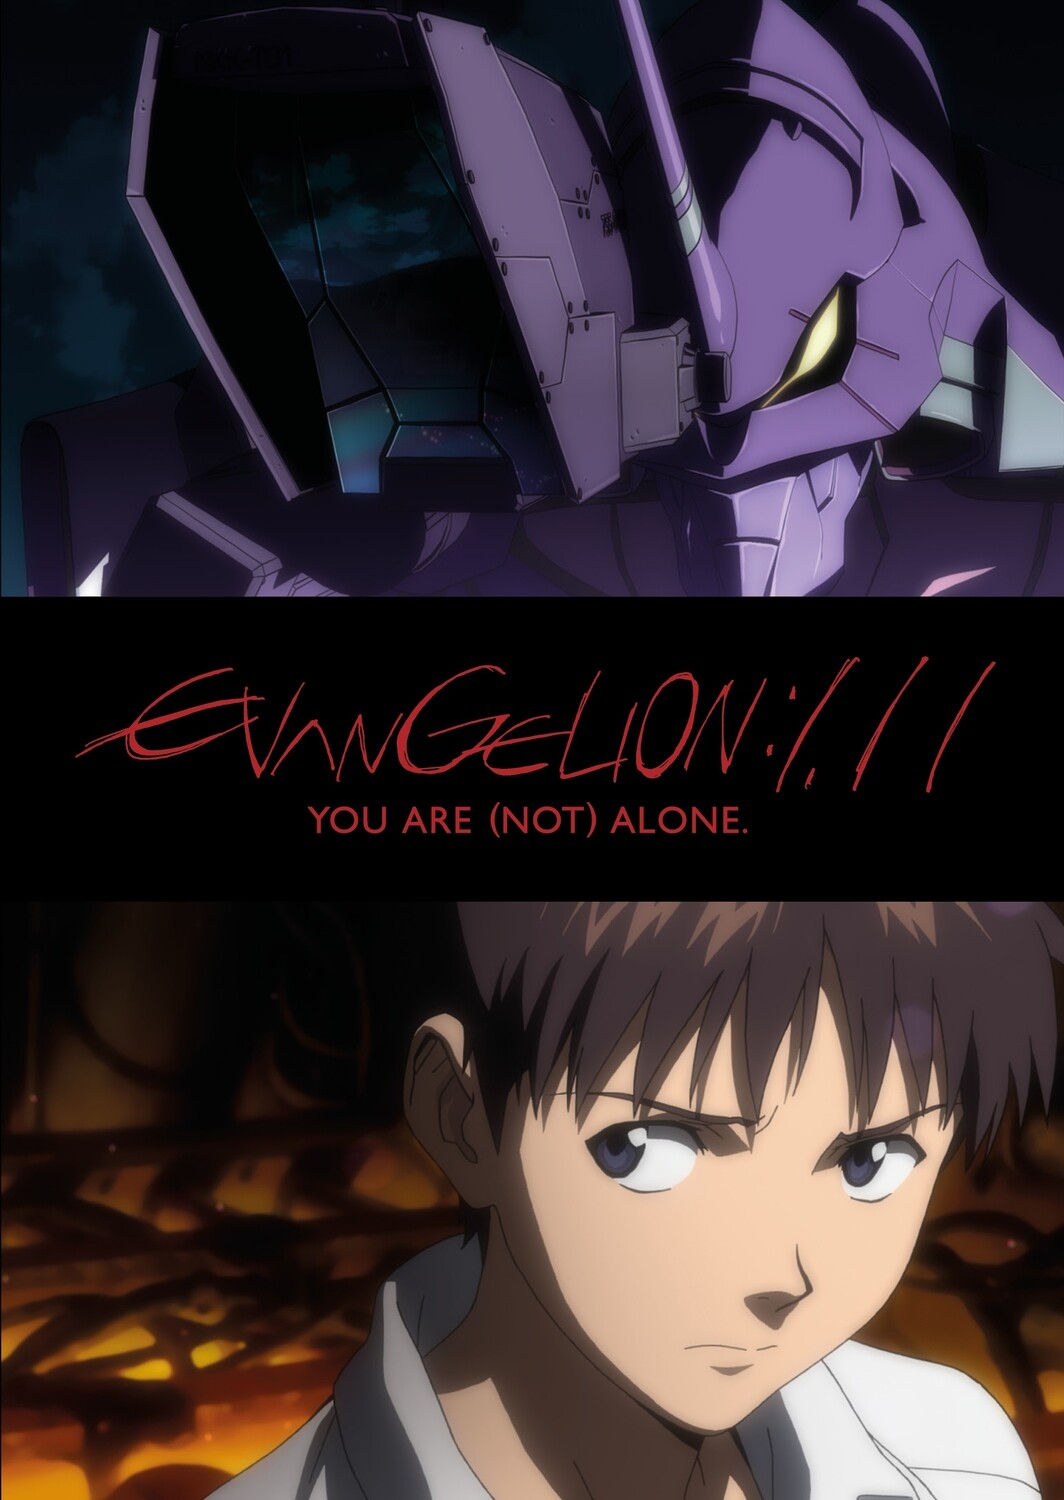 Evangelion 1.11 - You Are (Not) Alone, DVD / Blu Ray: DVD